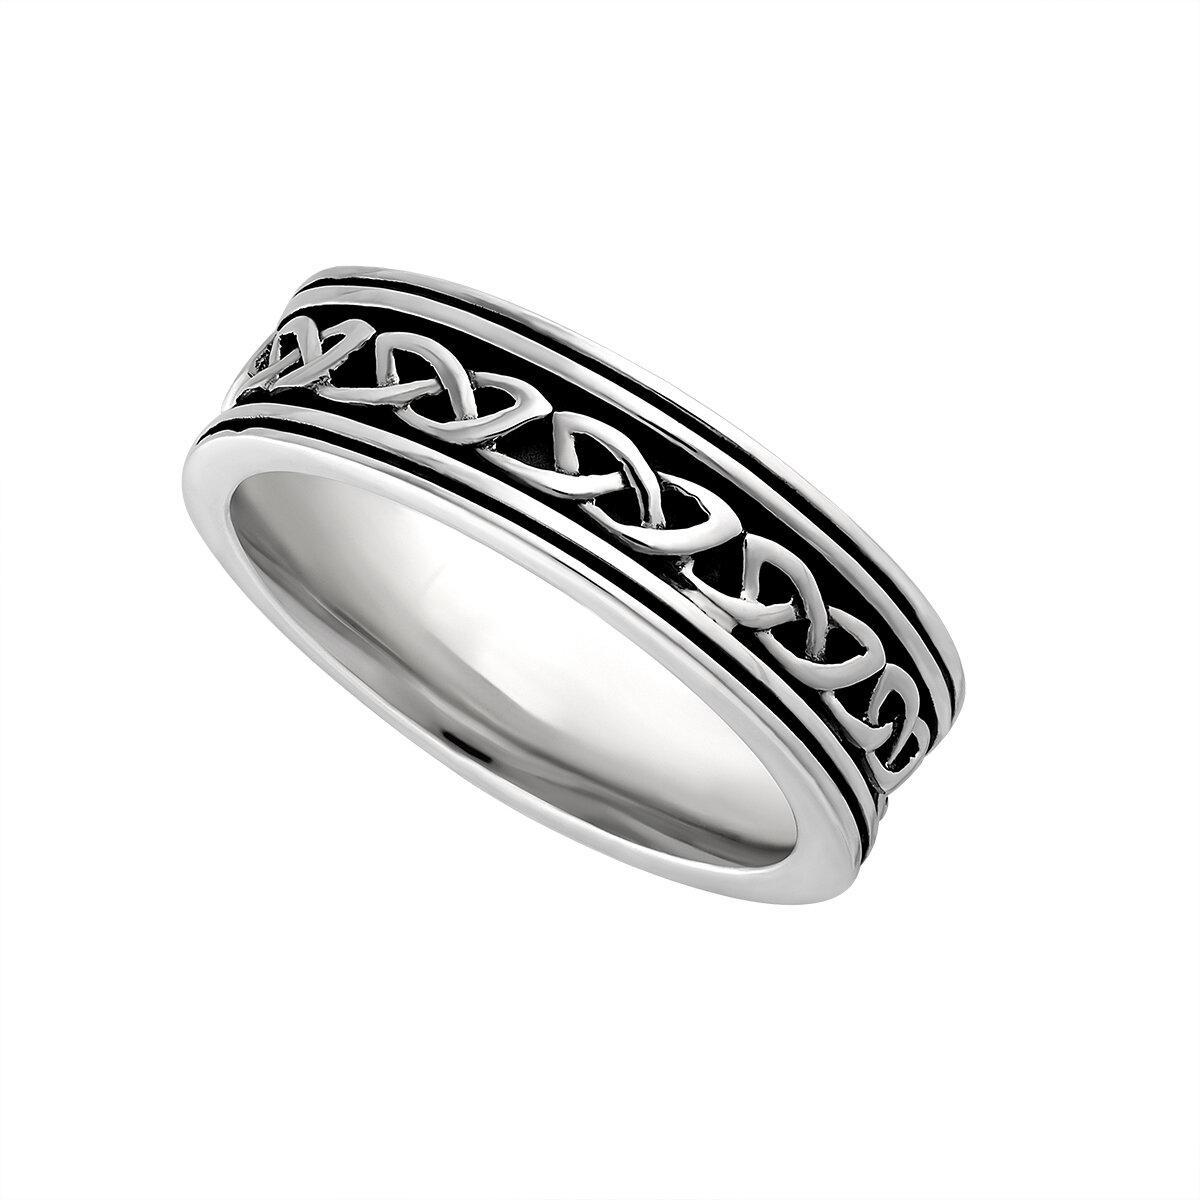 S/S Ladies Oxidized Celtic Knot Band - A Little Irish Too